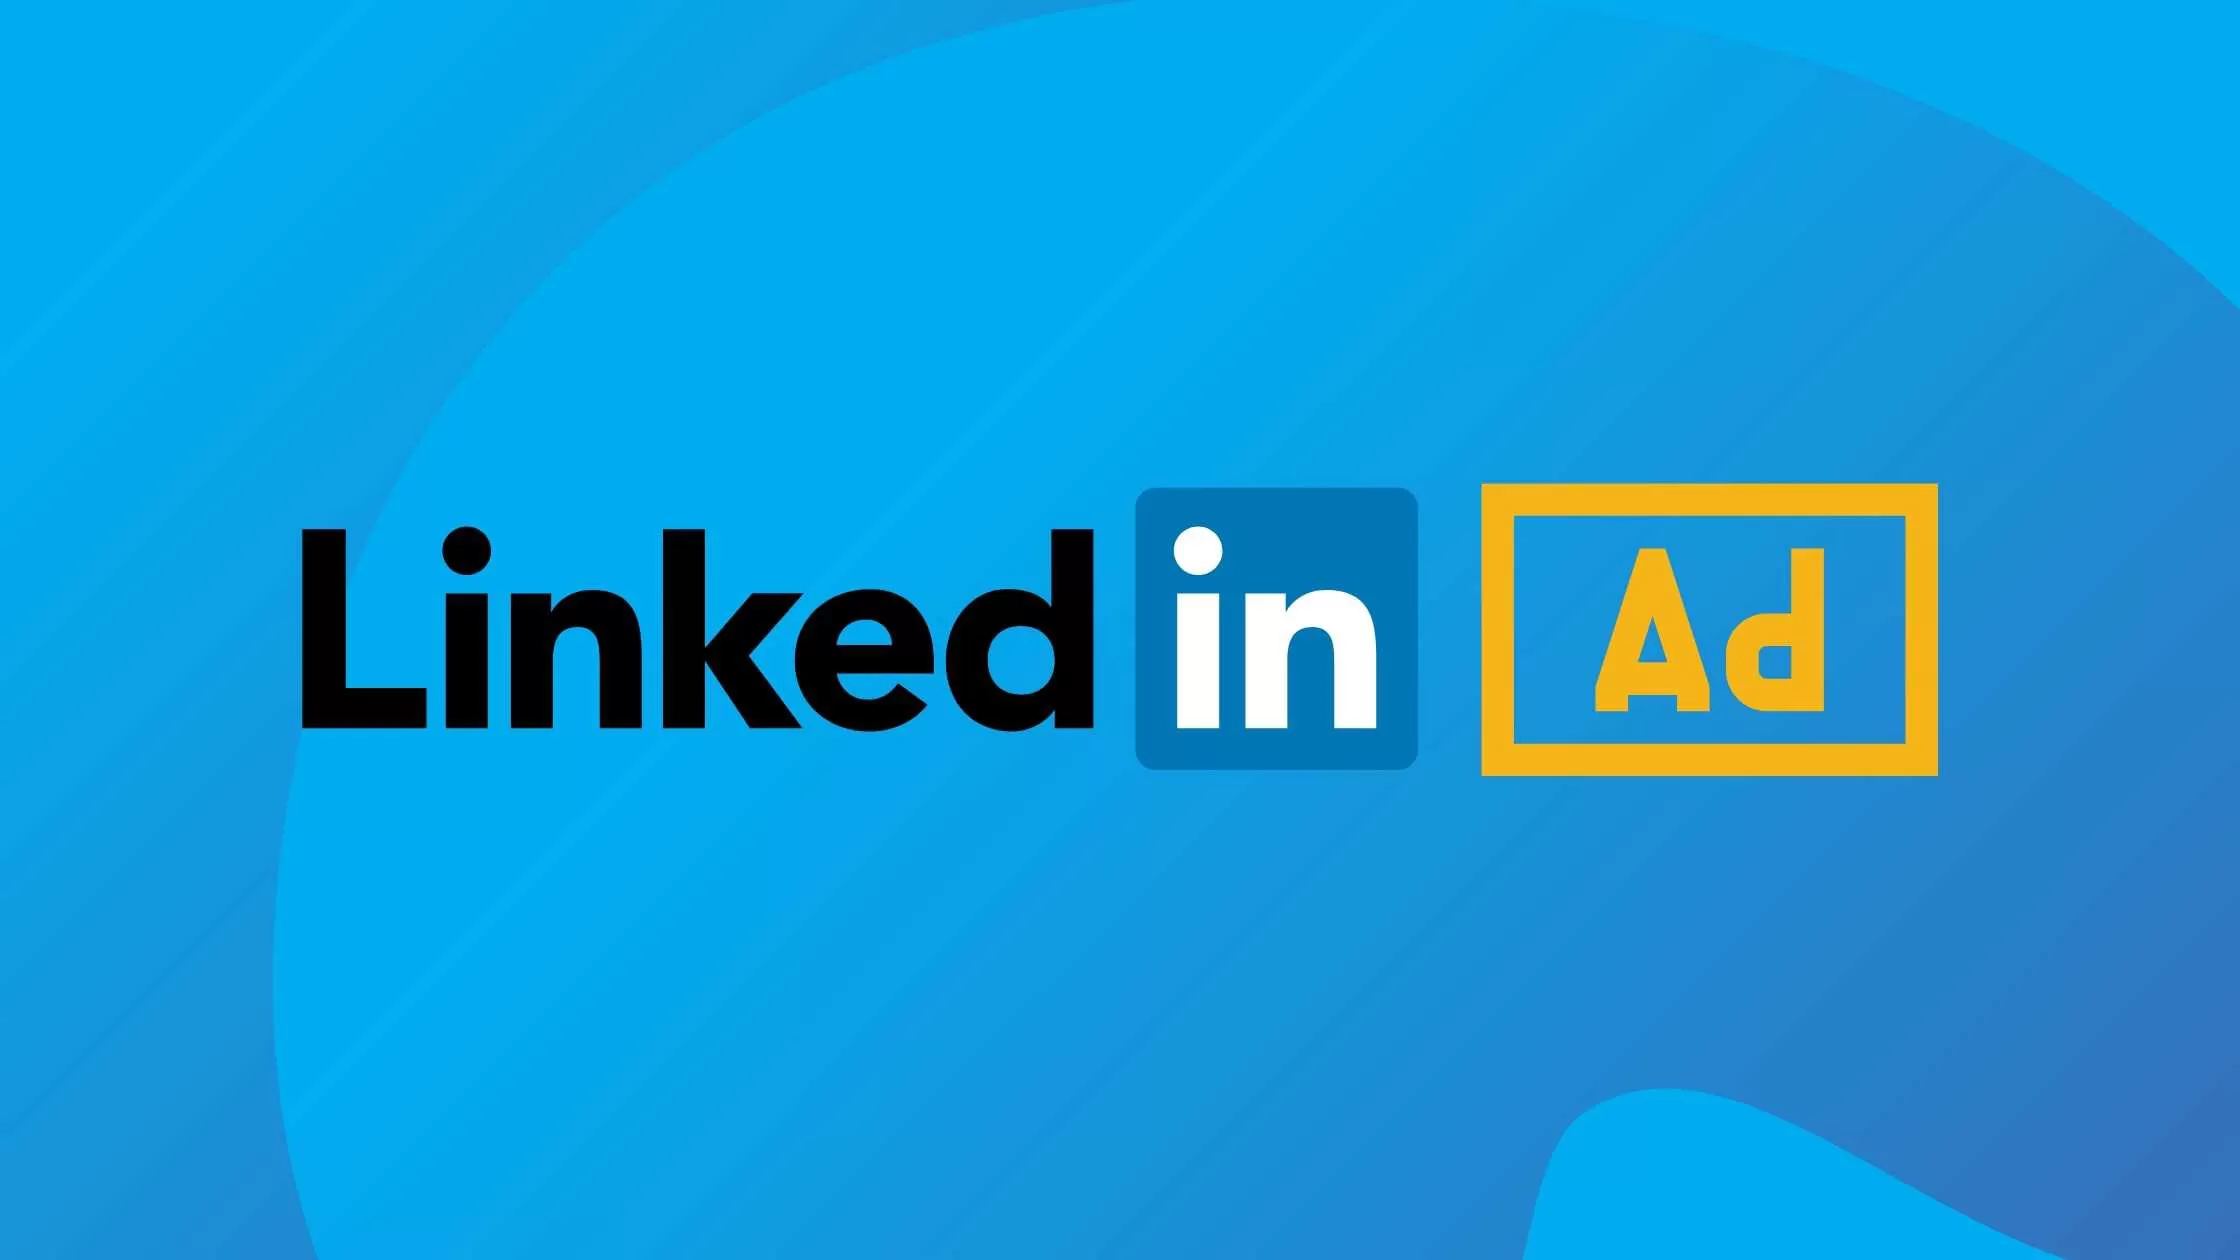 HOW TO ADVERTISE ON LINKEDIN